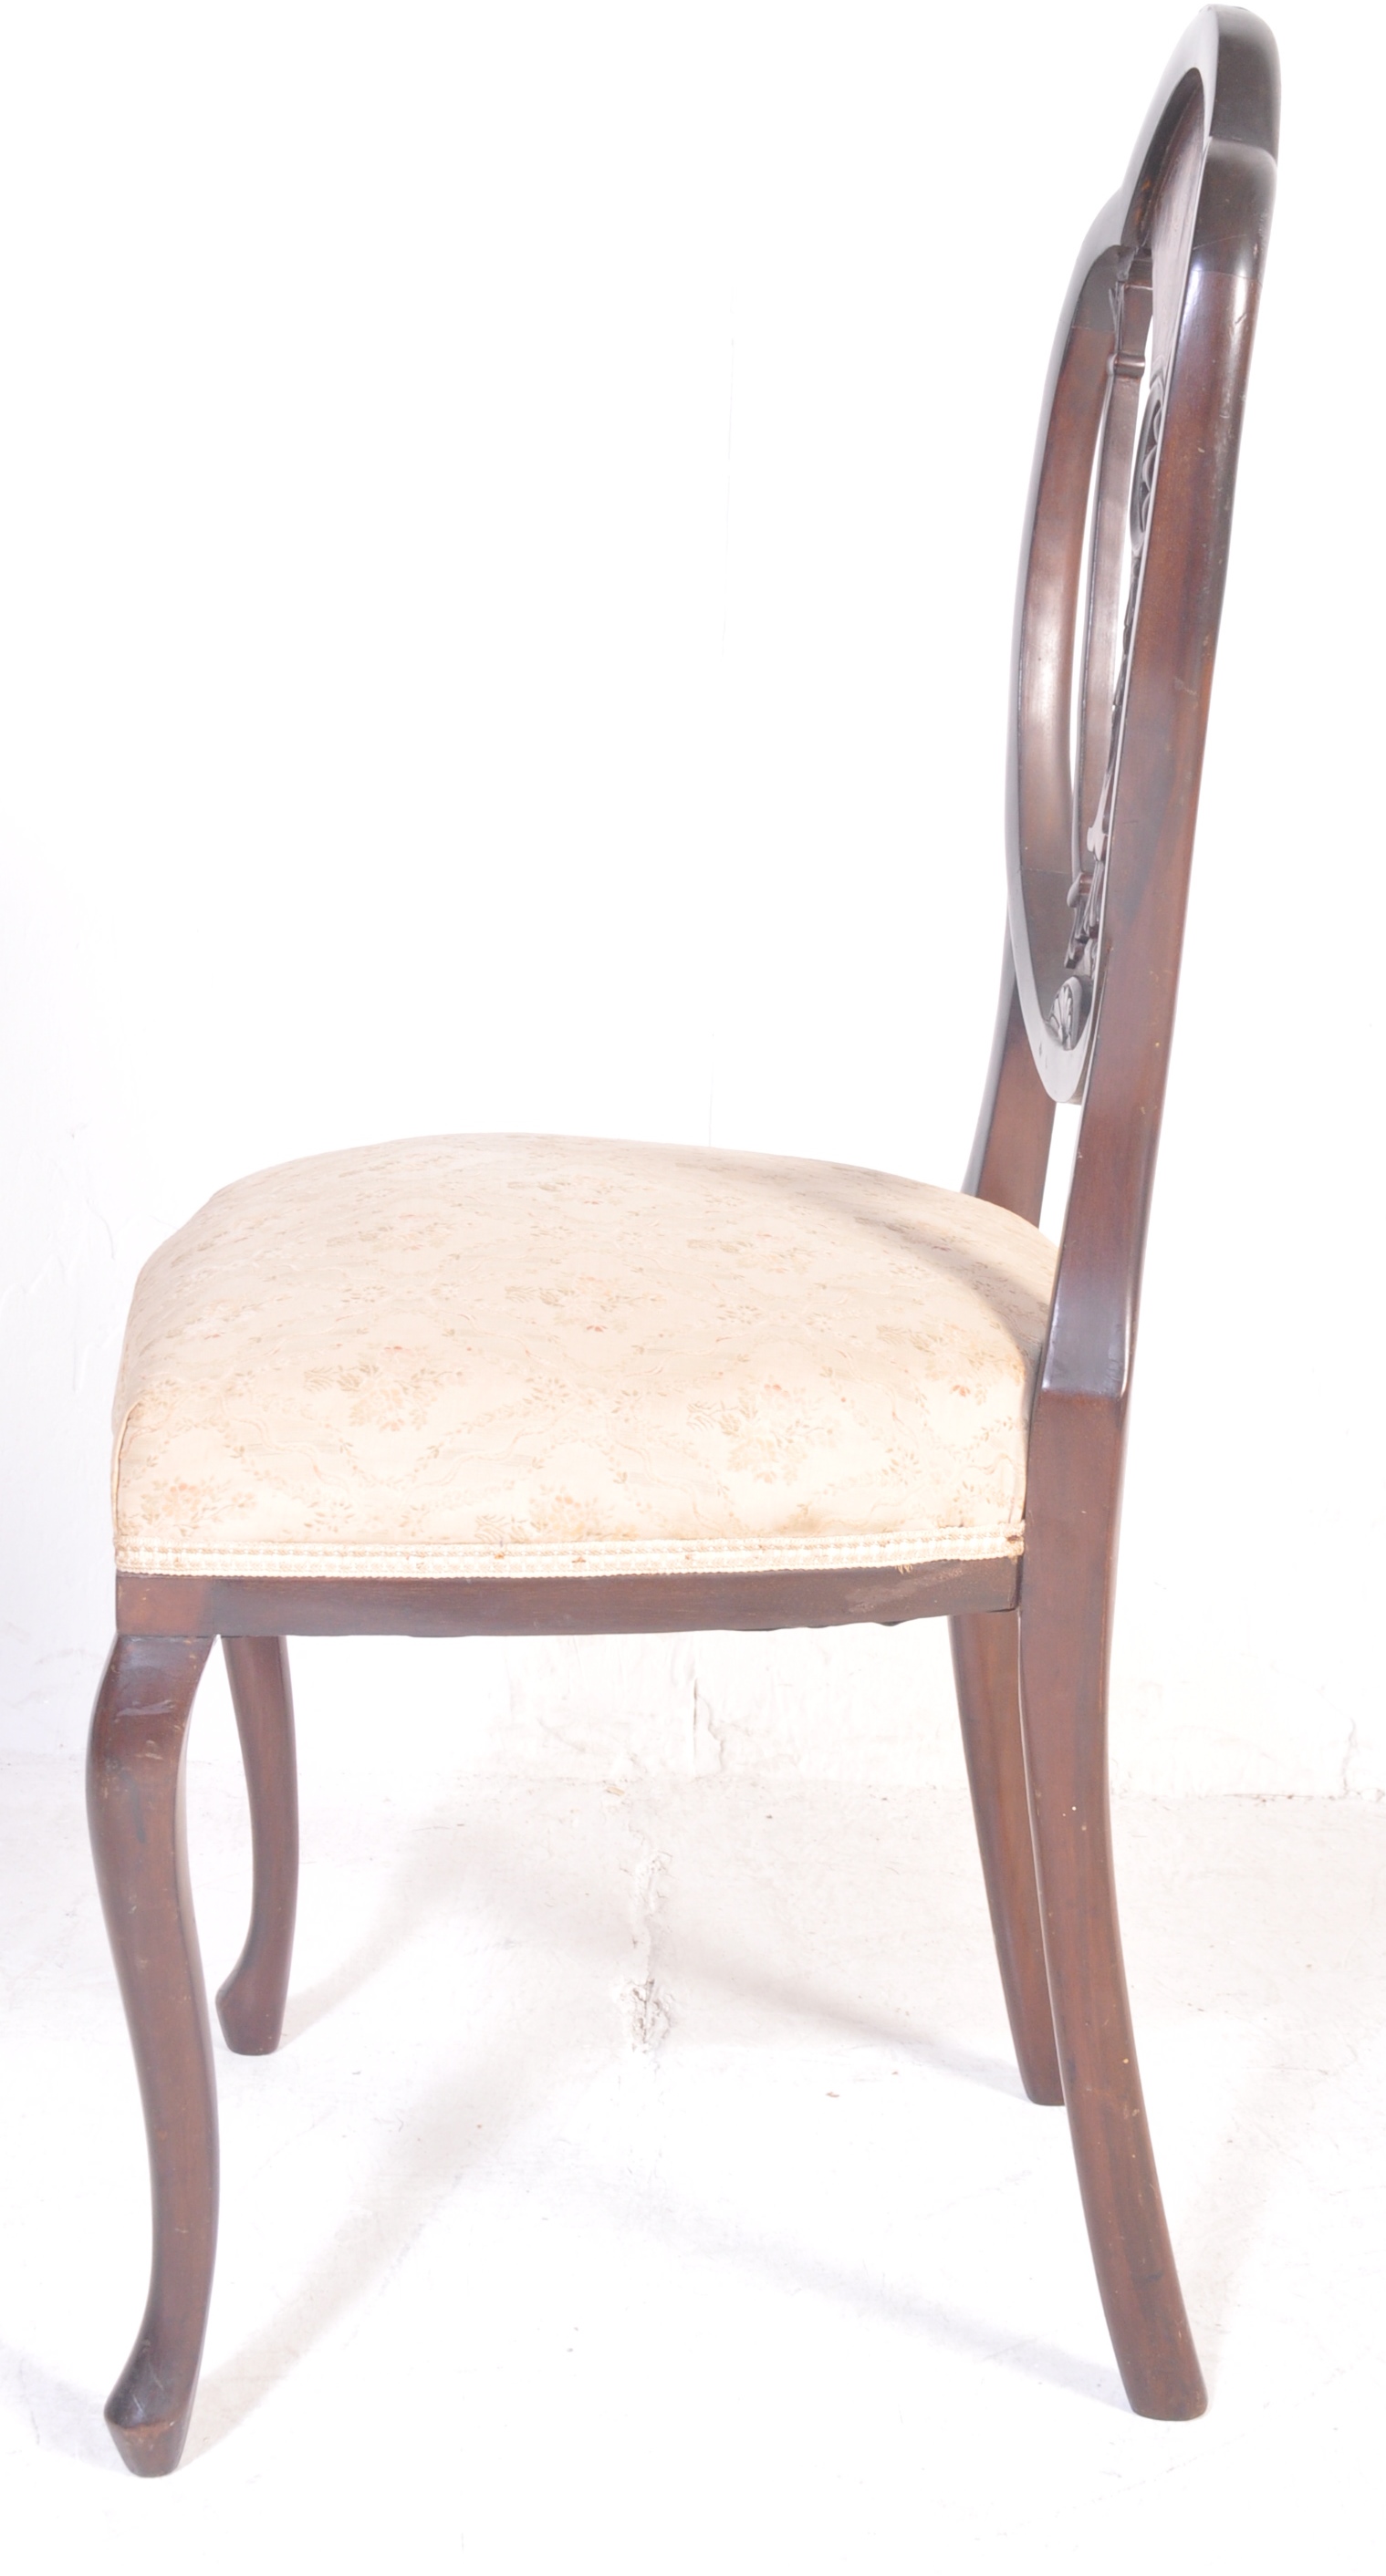 EDWARDIAN MAHOGANY INLAID UPHOLSTERED BEDROOM CHAIR - Image 5 of 5